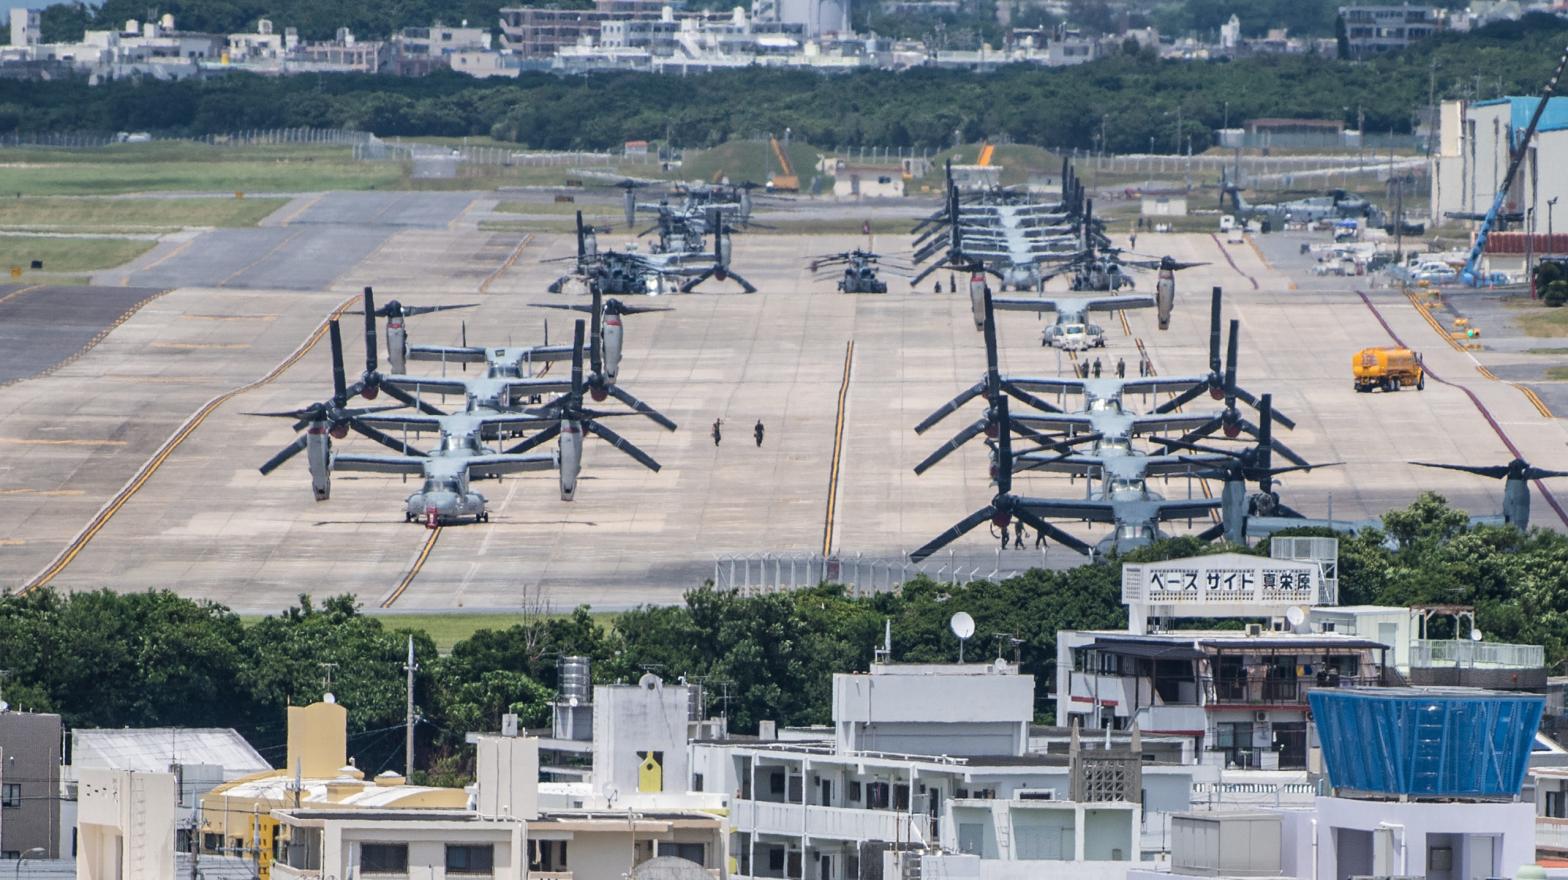 File photo of U.S. Marine Corps Air Station Futenma in Okinawa, Japan, which currently has at least 39 Marines diagnosed with covid-19. (Photo: Carl Court, Getty Images)